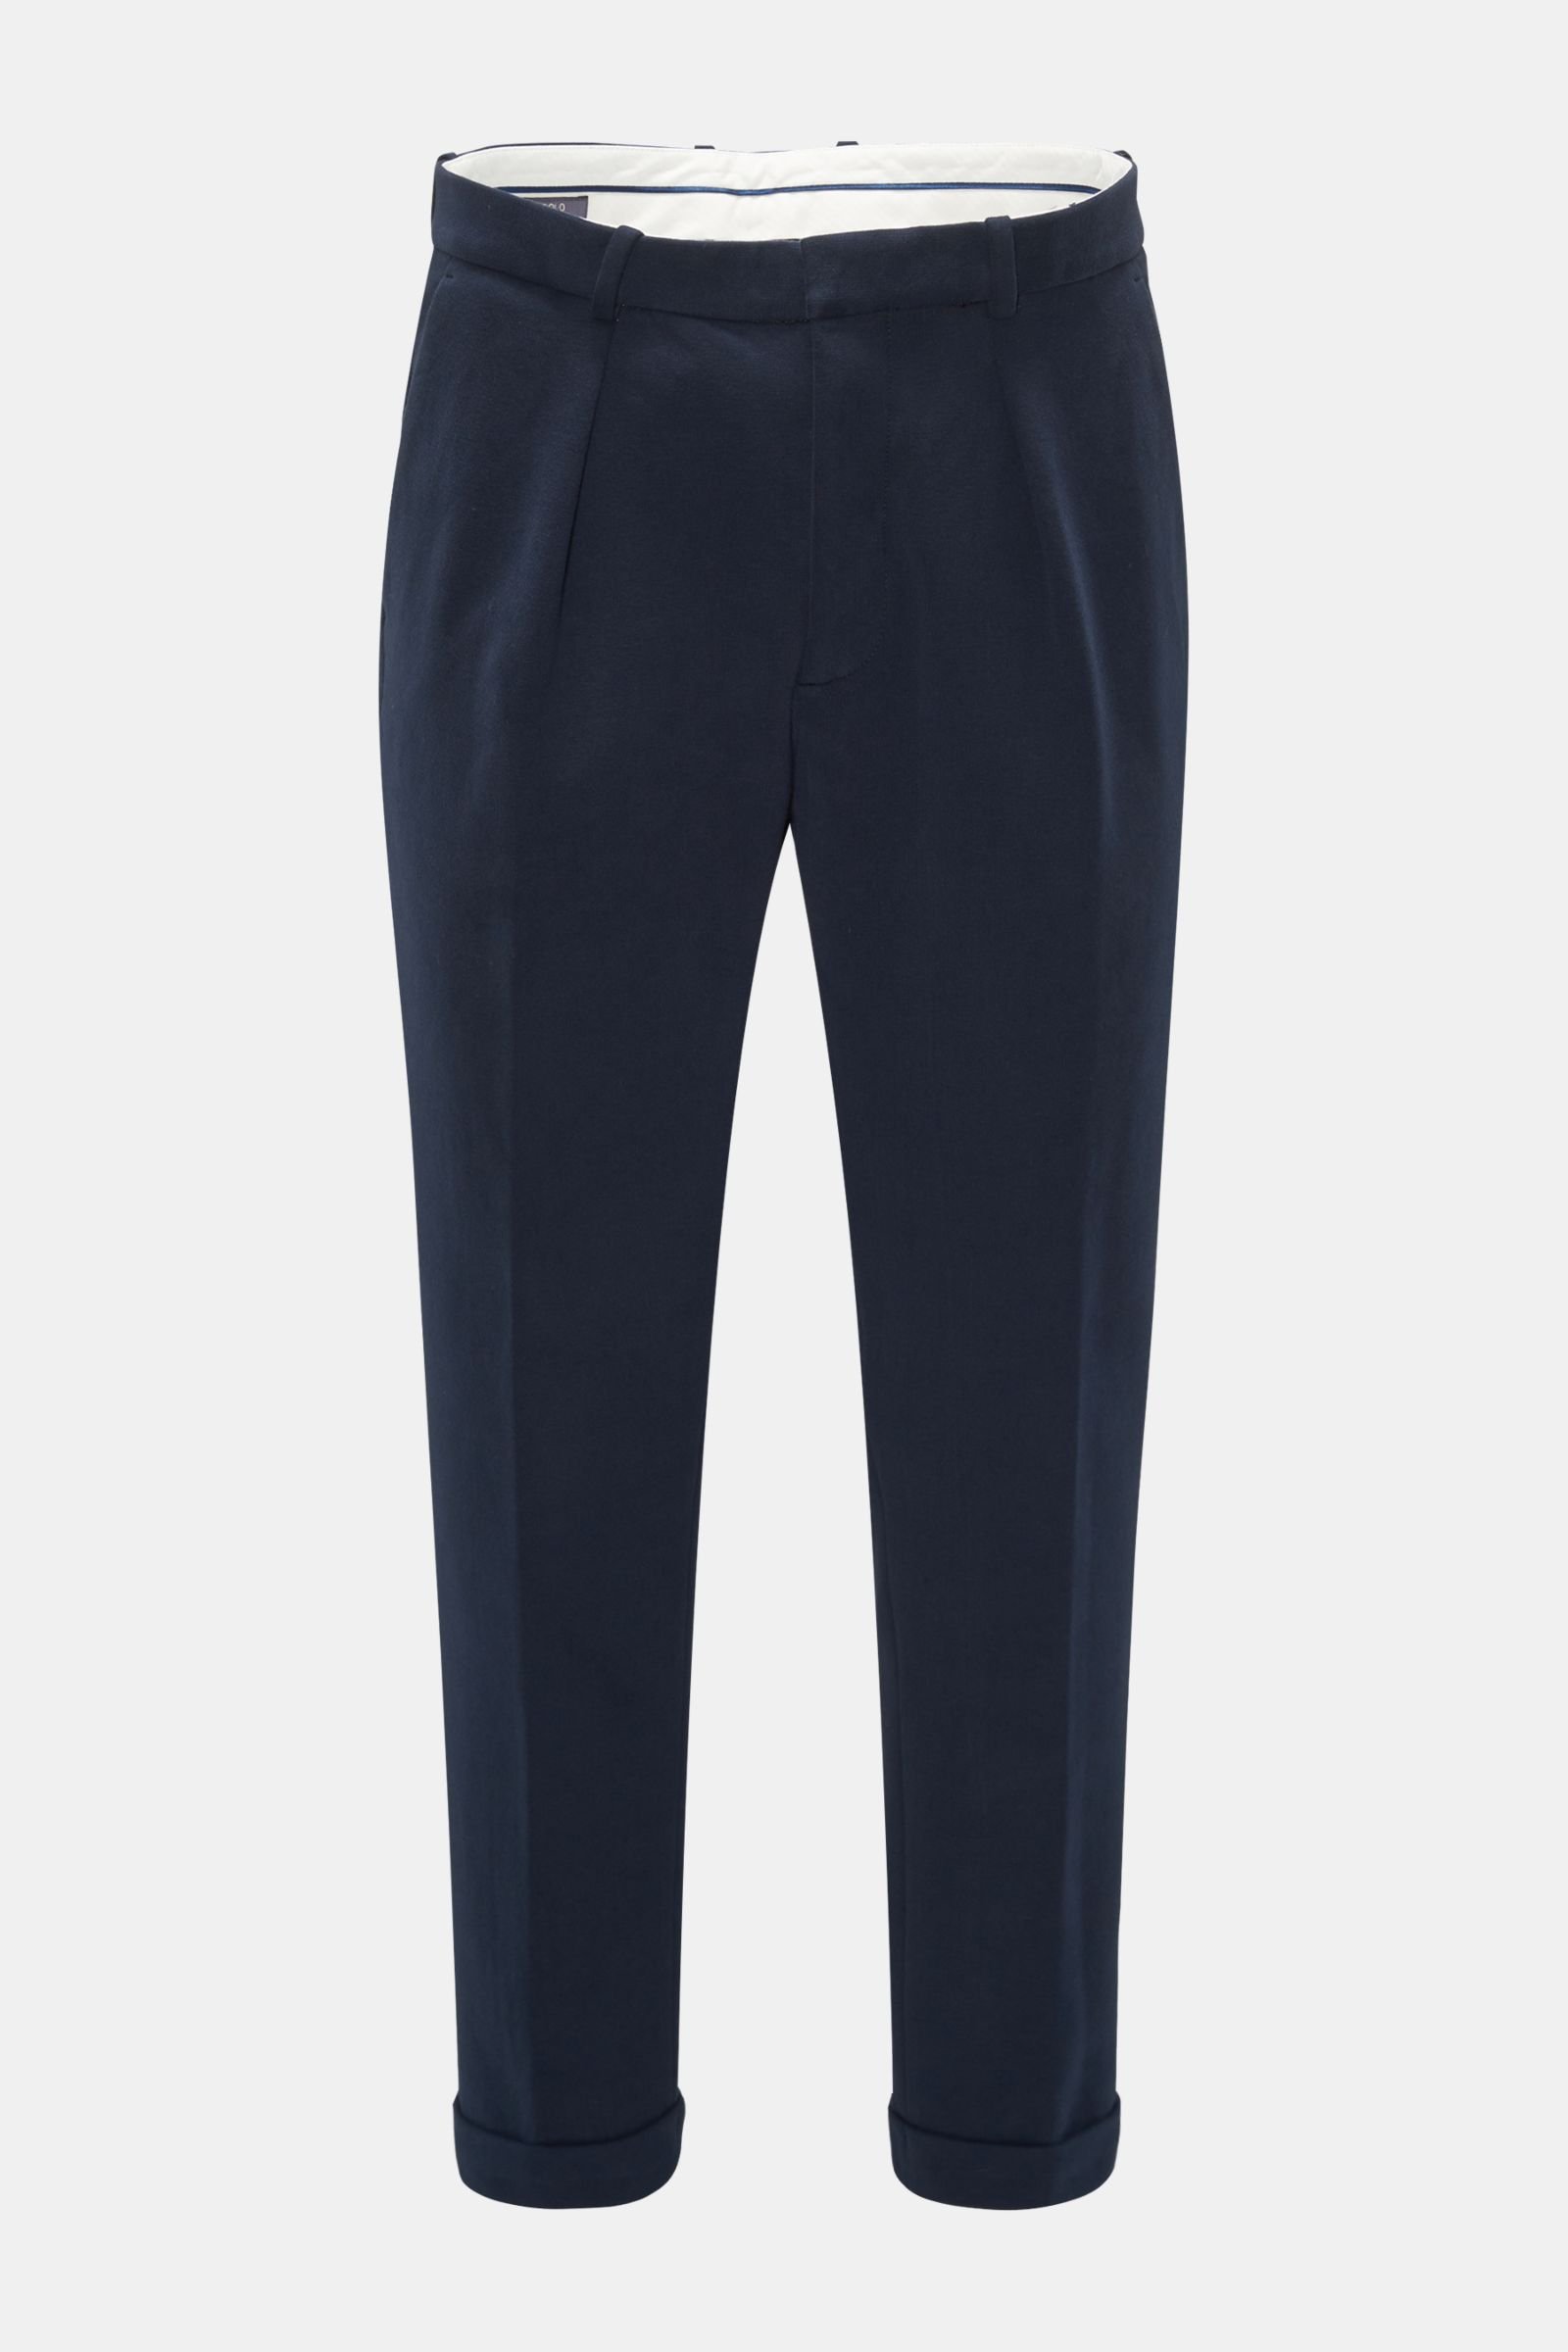 Jersey trousers navy